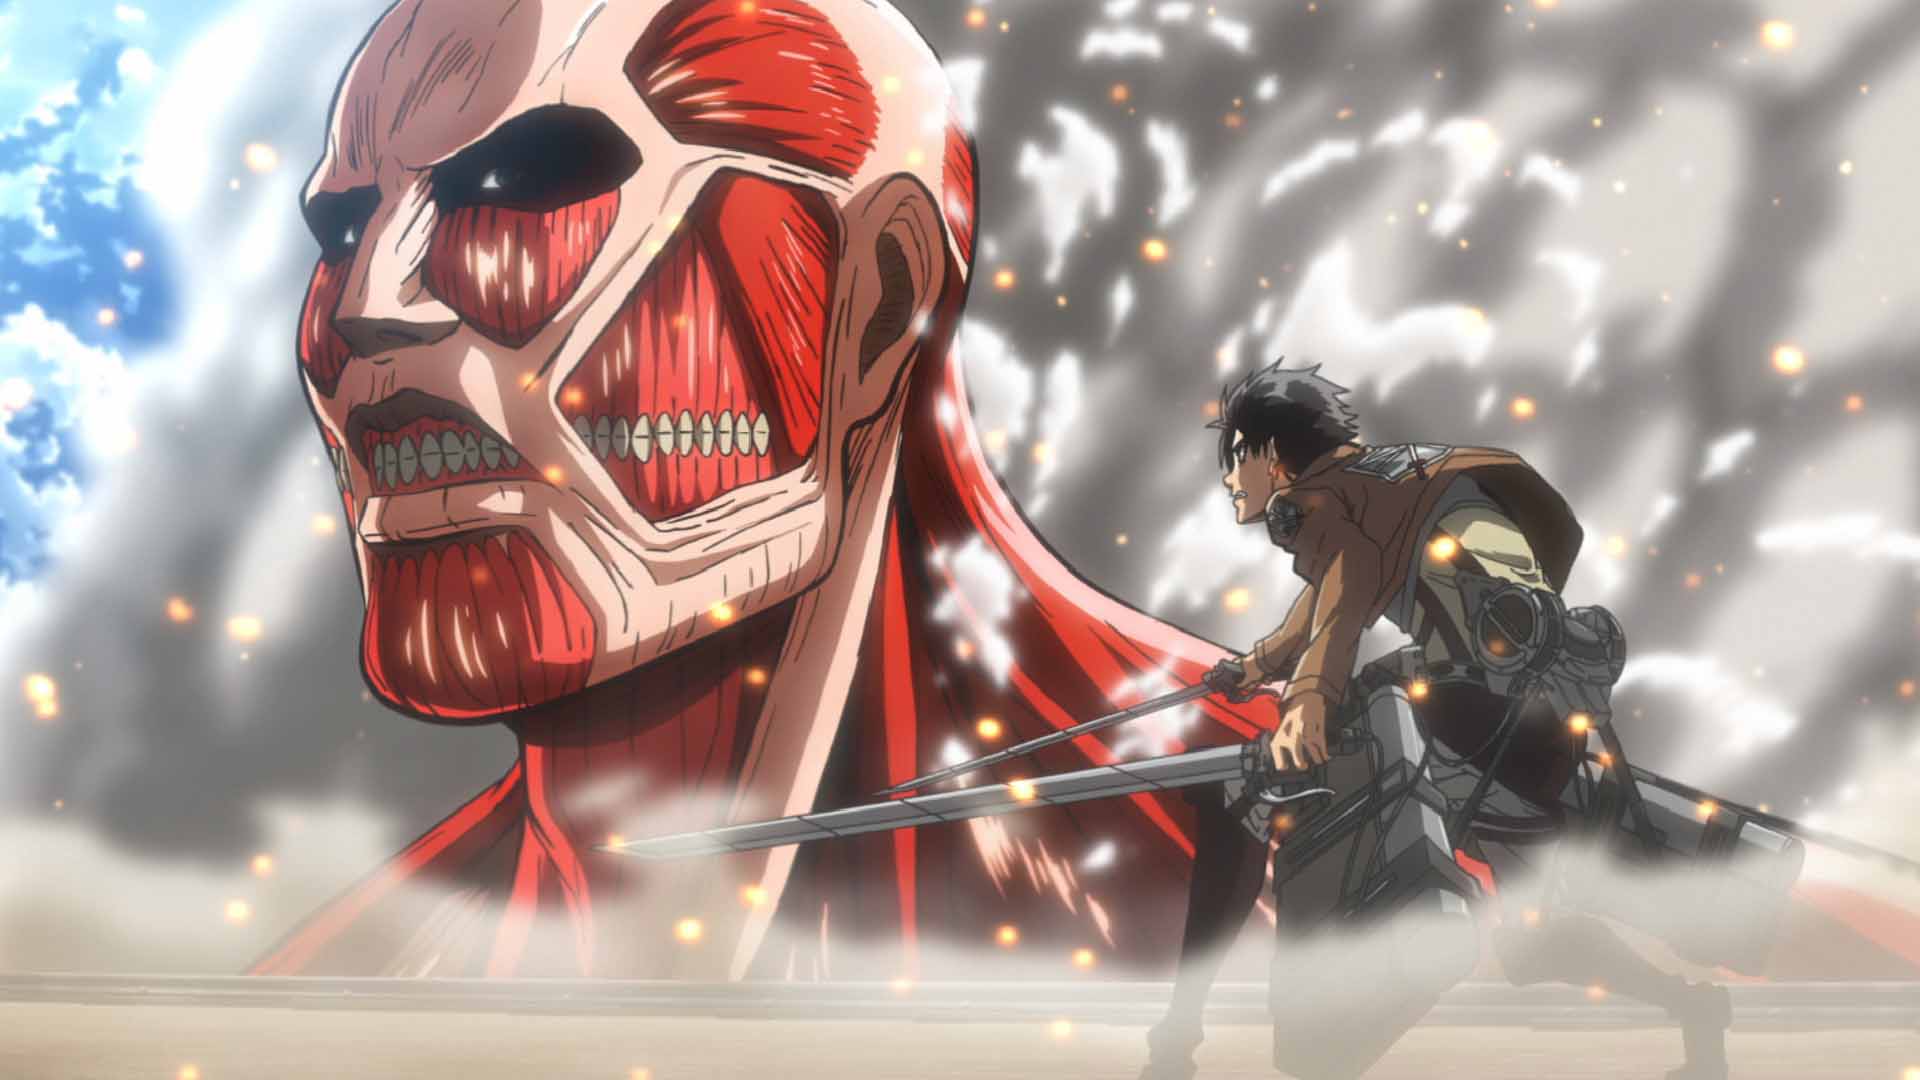 Where to watch Attack on Titan right now